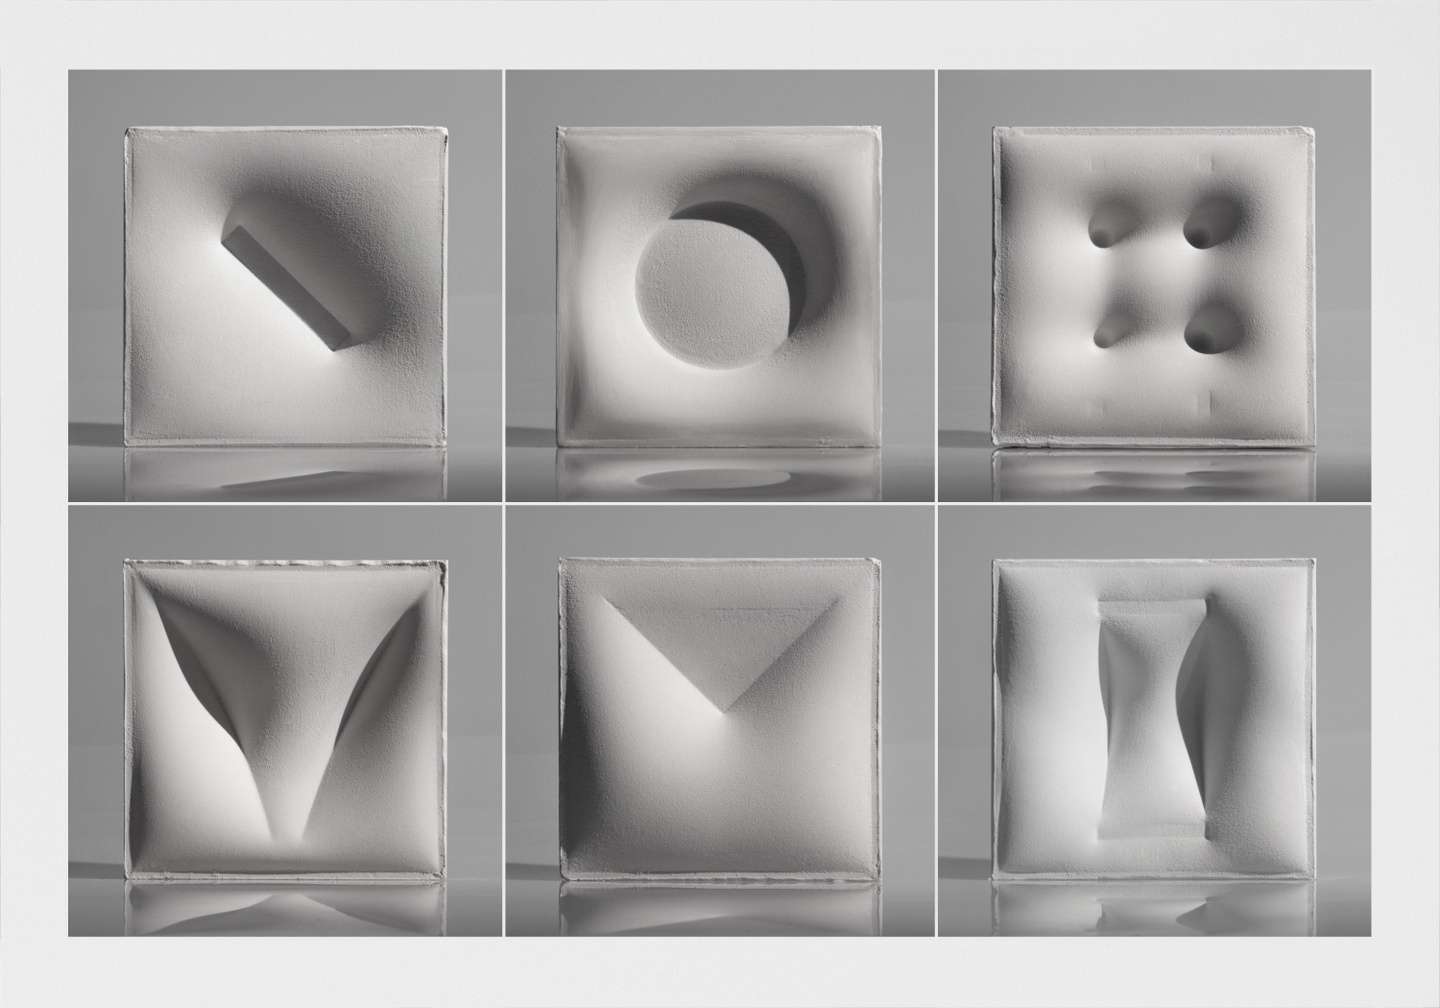 Six squares of cast plaster that have been made as reverse impressions of the frames from the previous image.